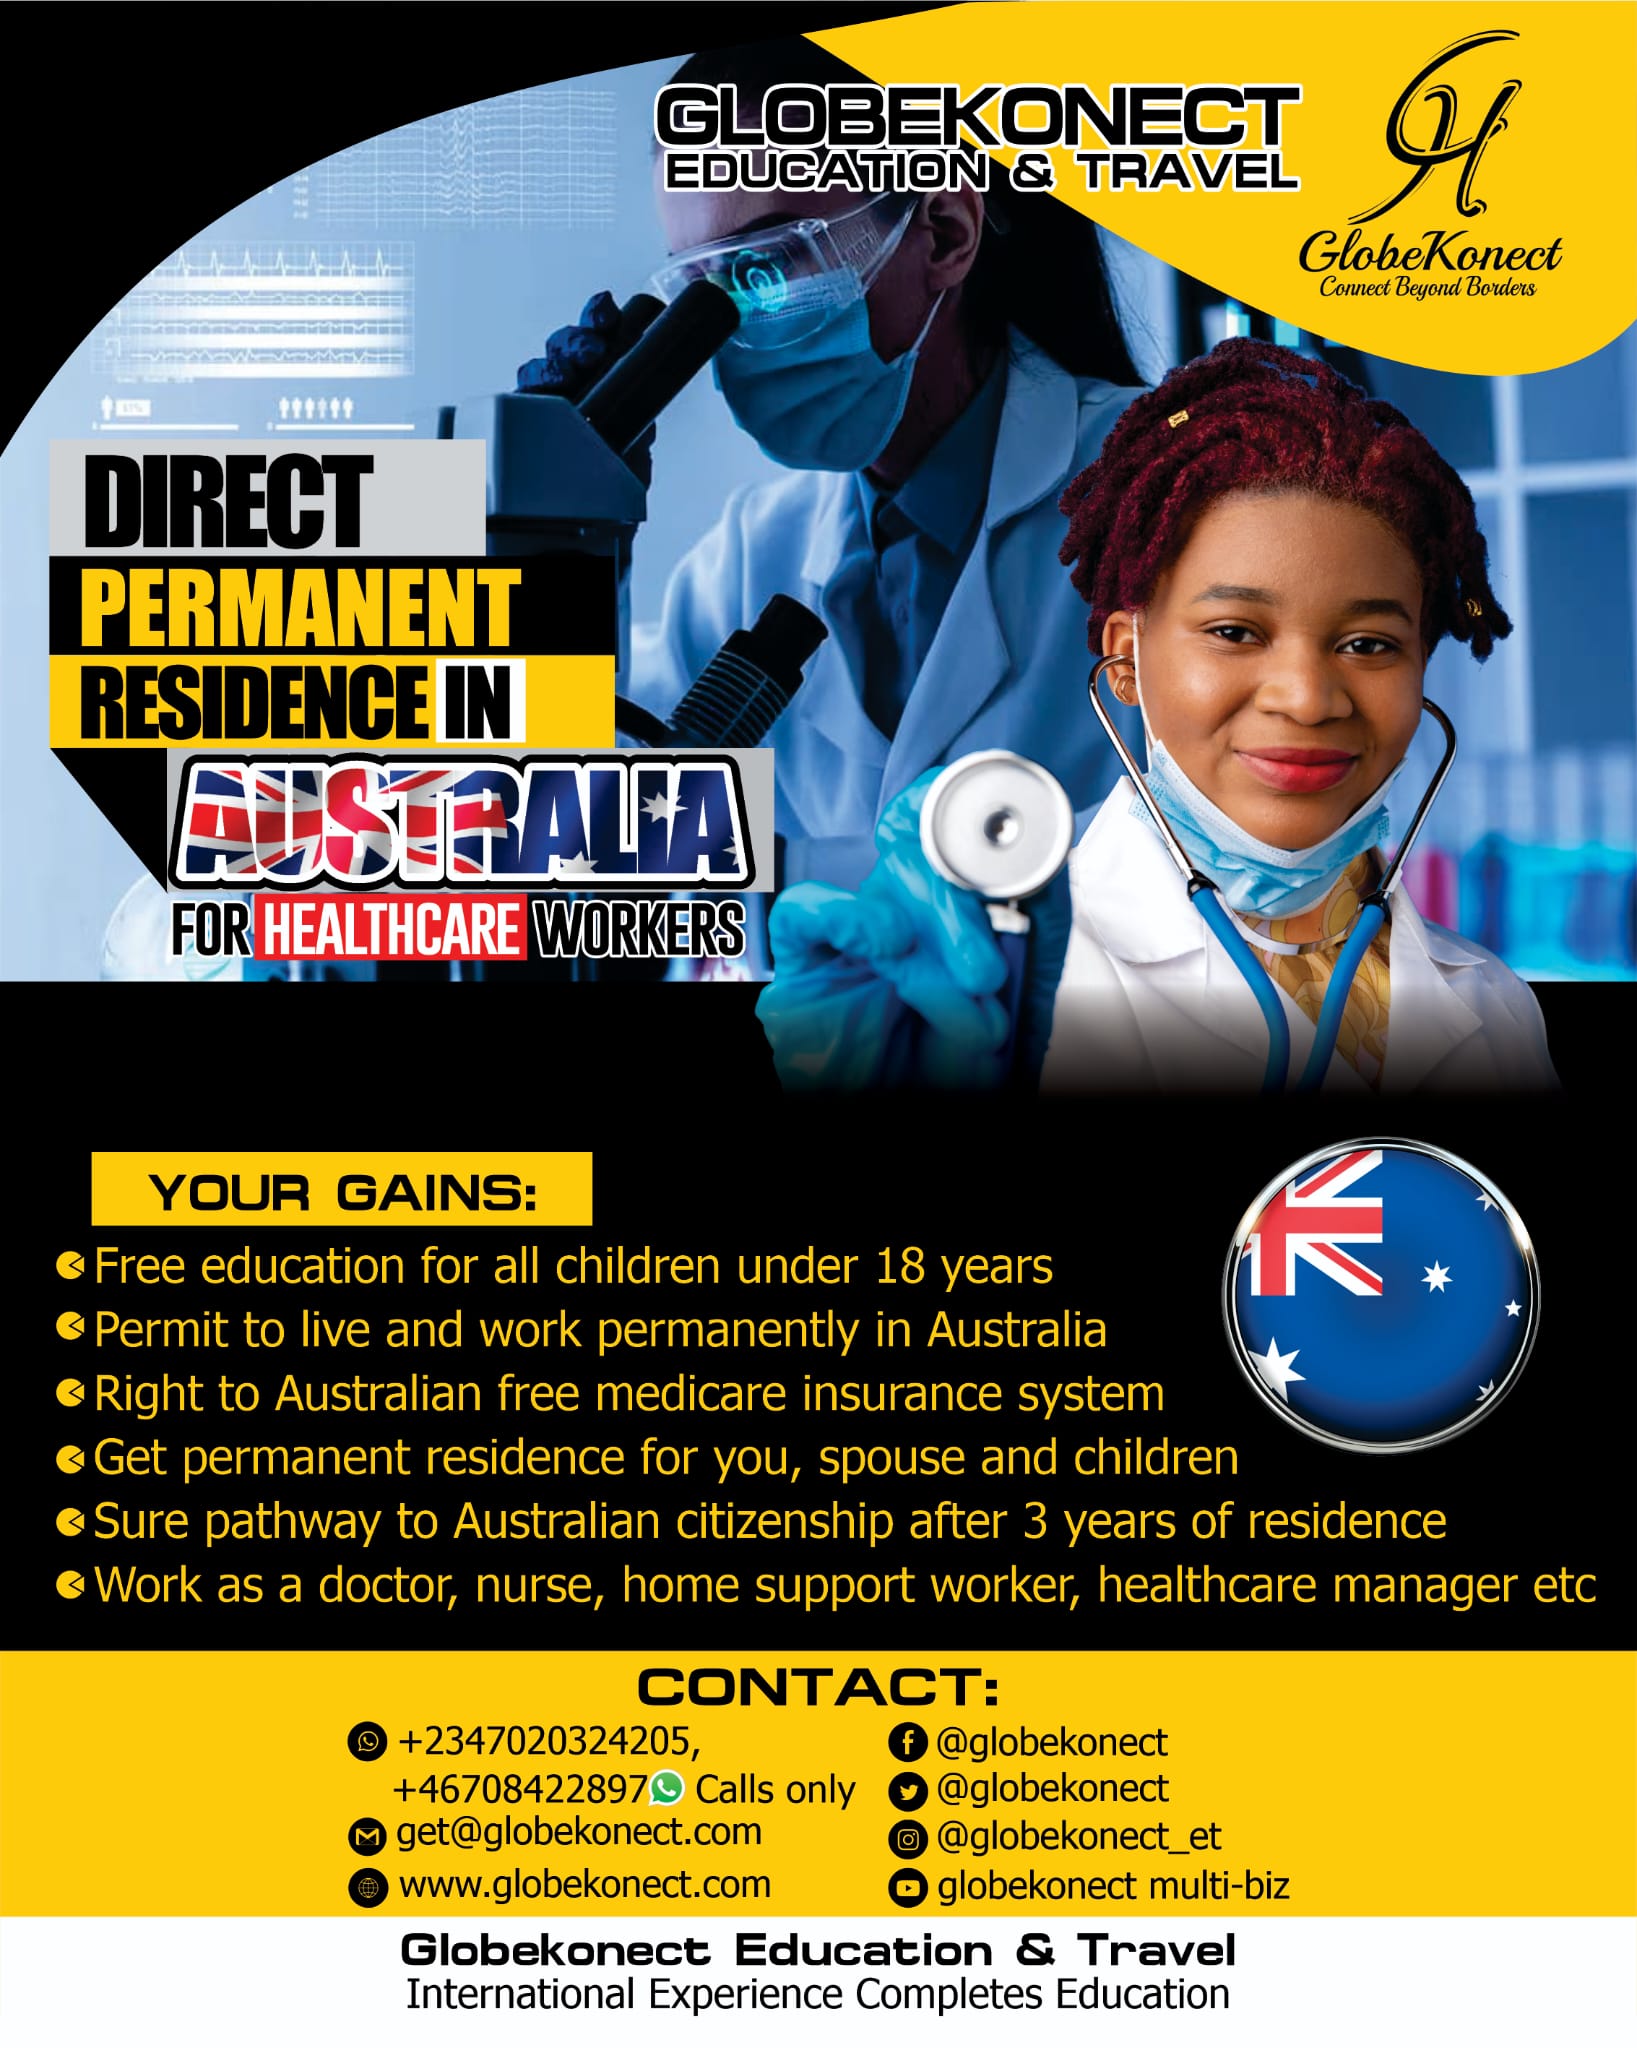 Direct Permanent Residence in Australia for Healthcare Workers